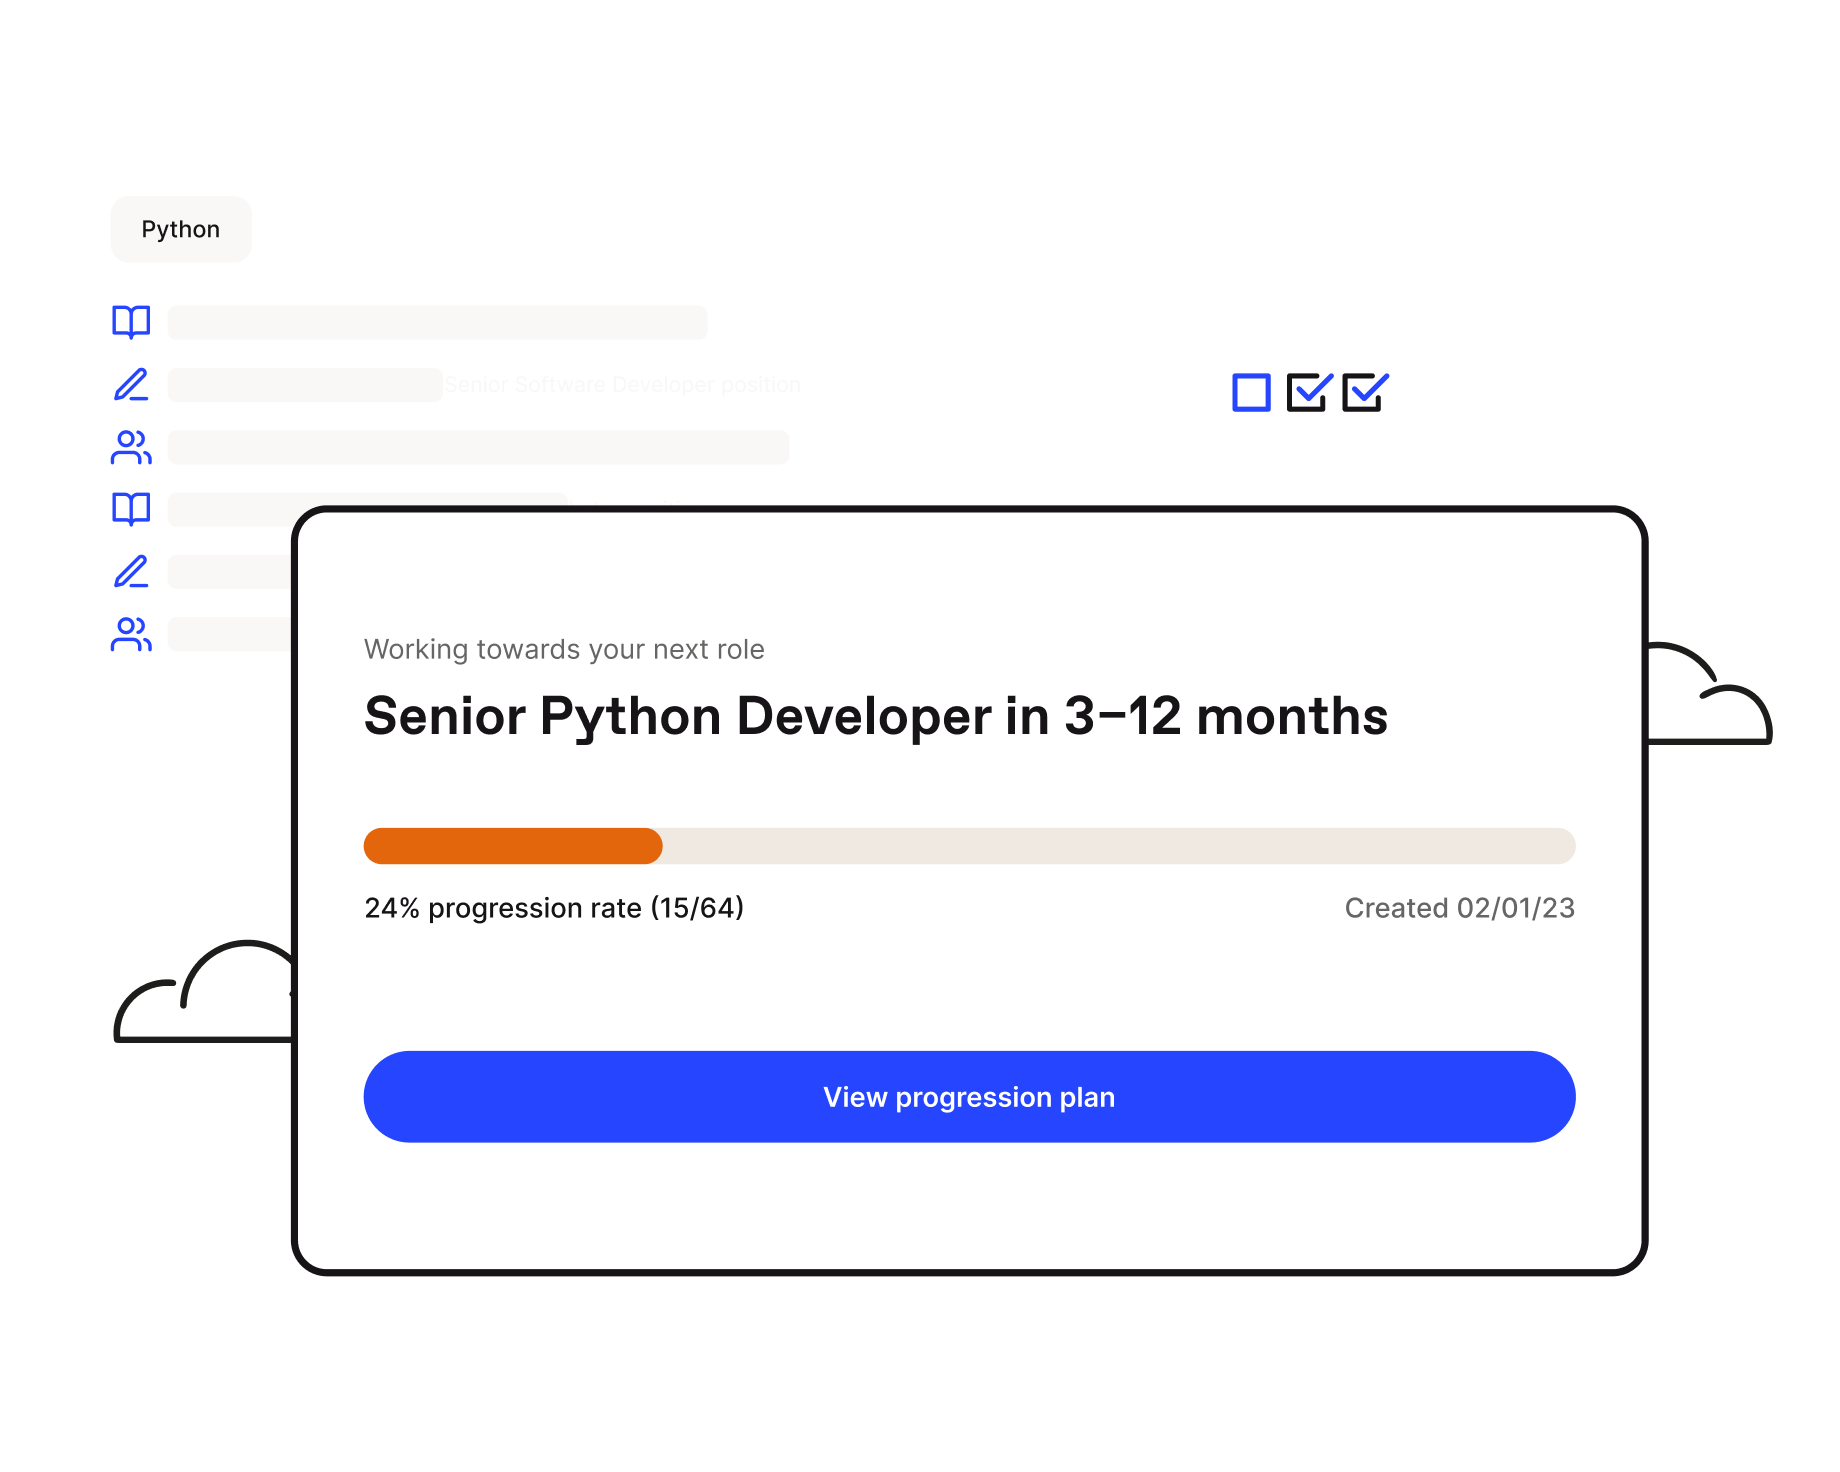 employee looking at the progression as a new senior python developer